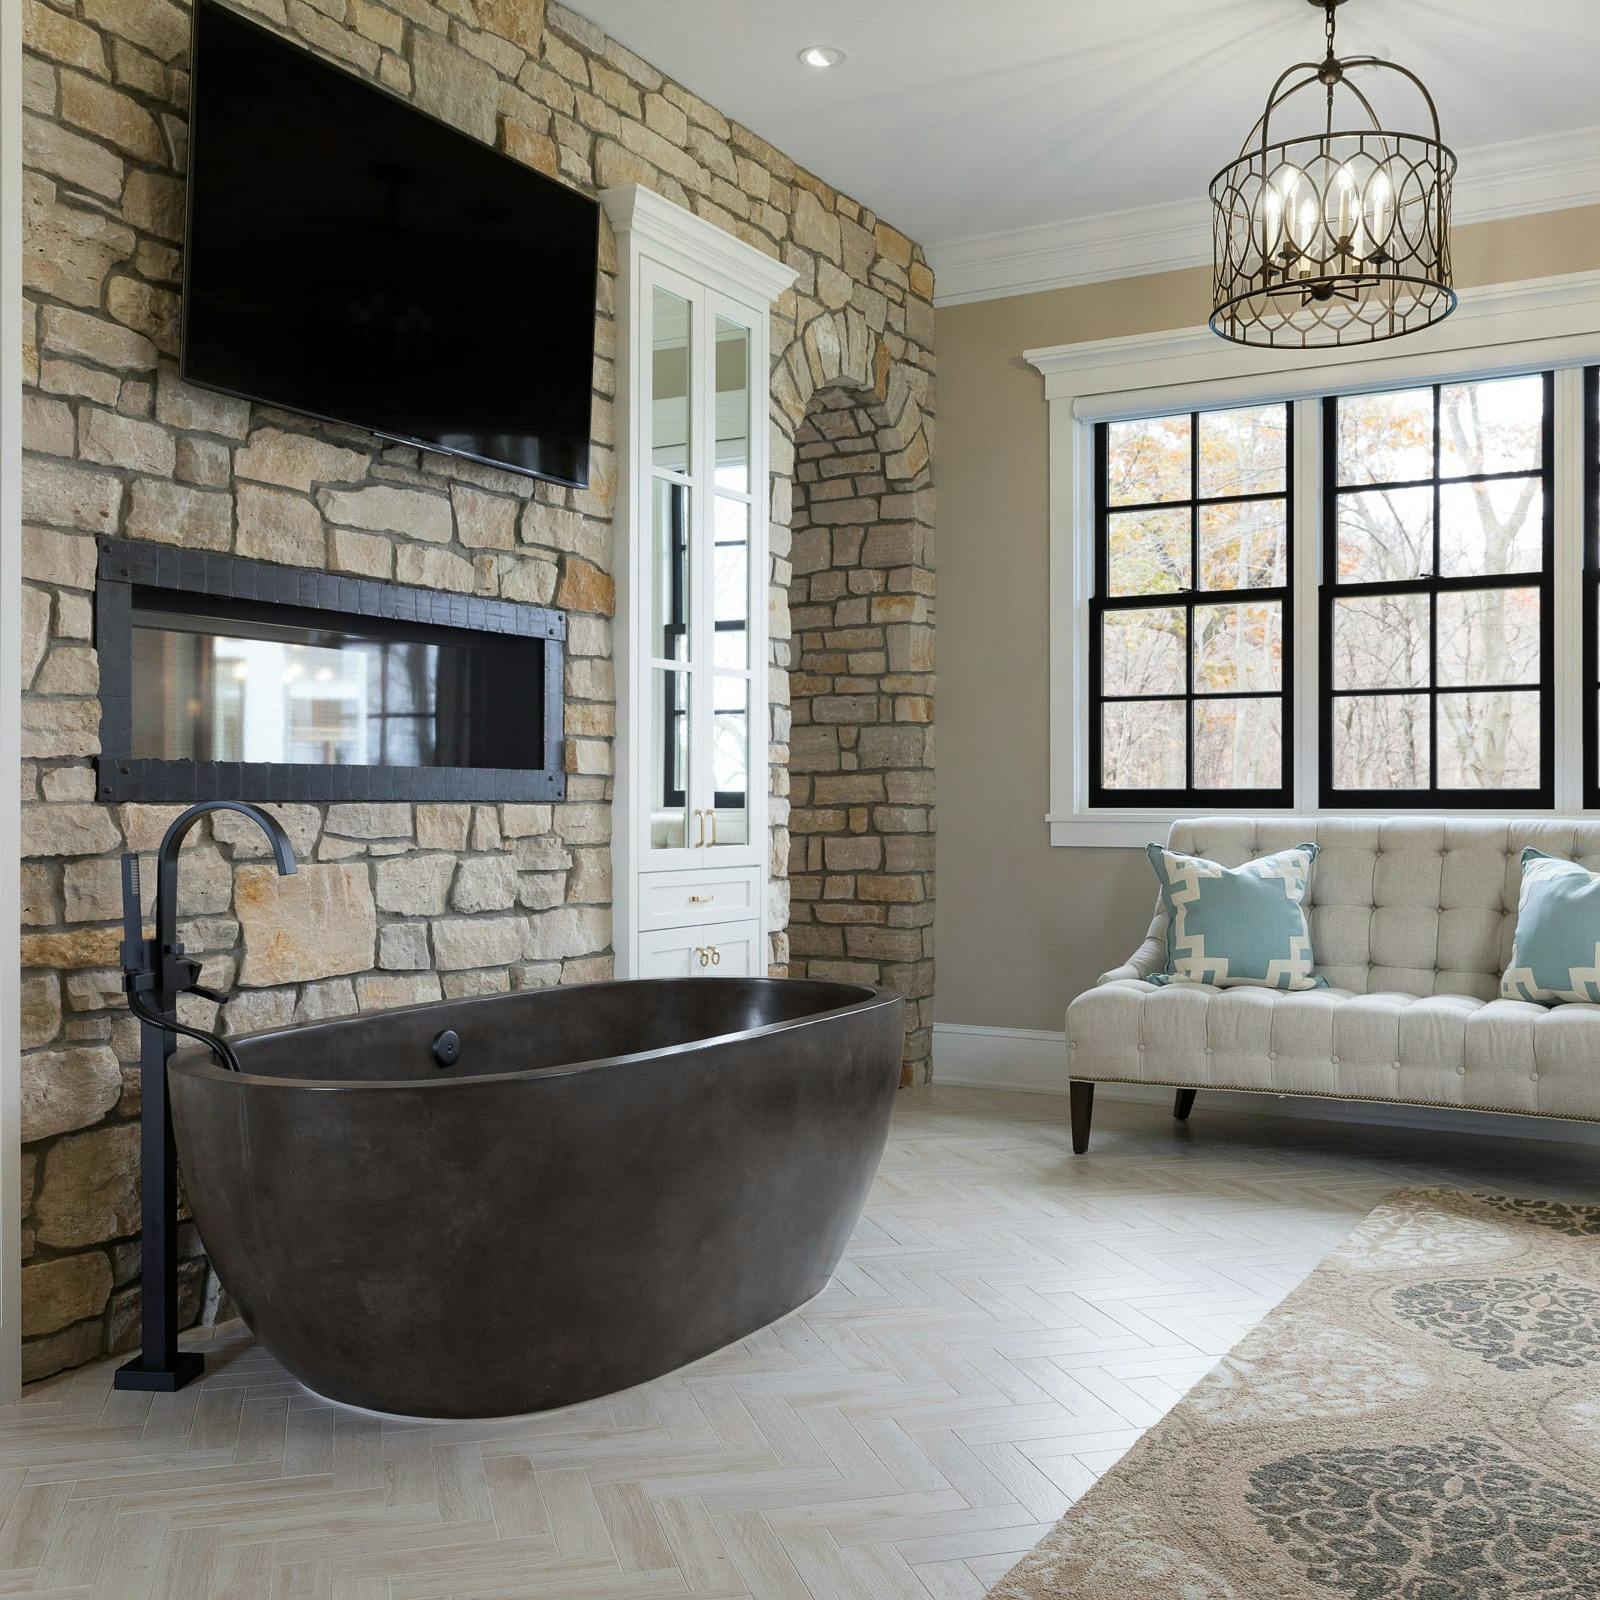 bathroom with concrete standing tub, TV, fireplace and seating